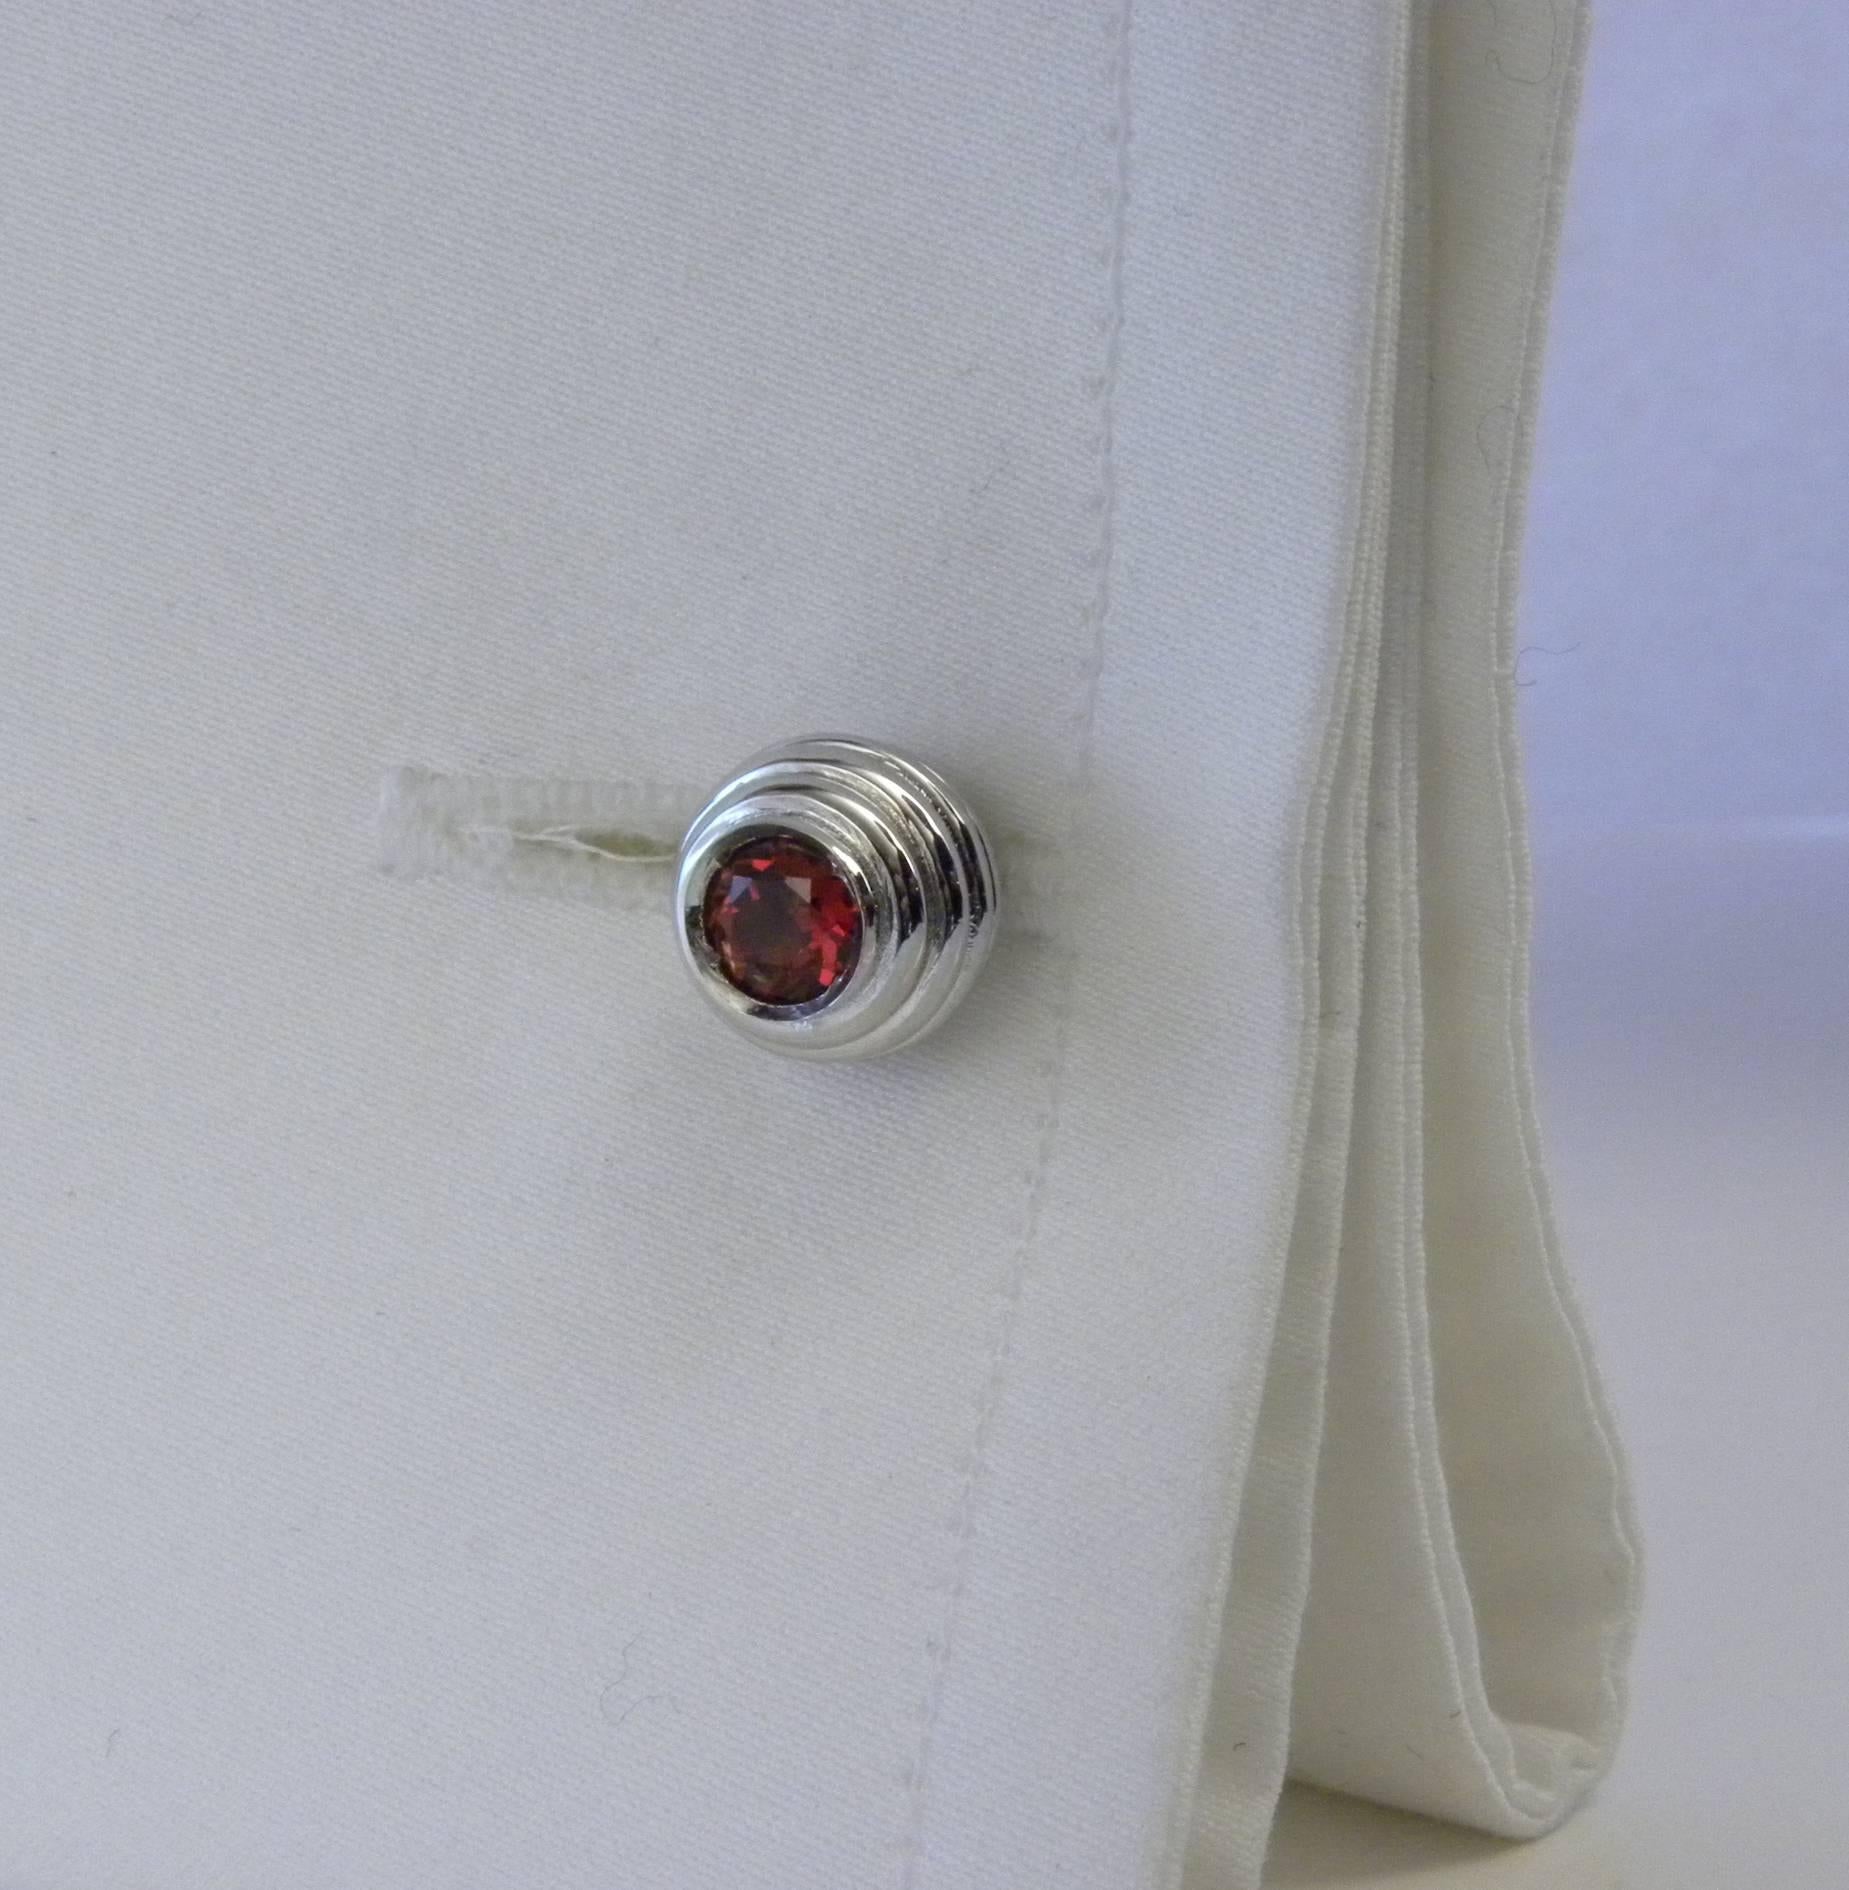 A set of cufflinks and 4 stud combining the white of sterling silver with the vivid red of spessartine, a precious garnet variety.
In our smart Black Box and Pouch